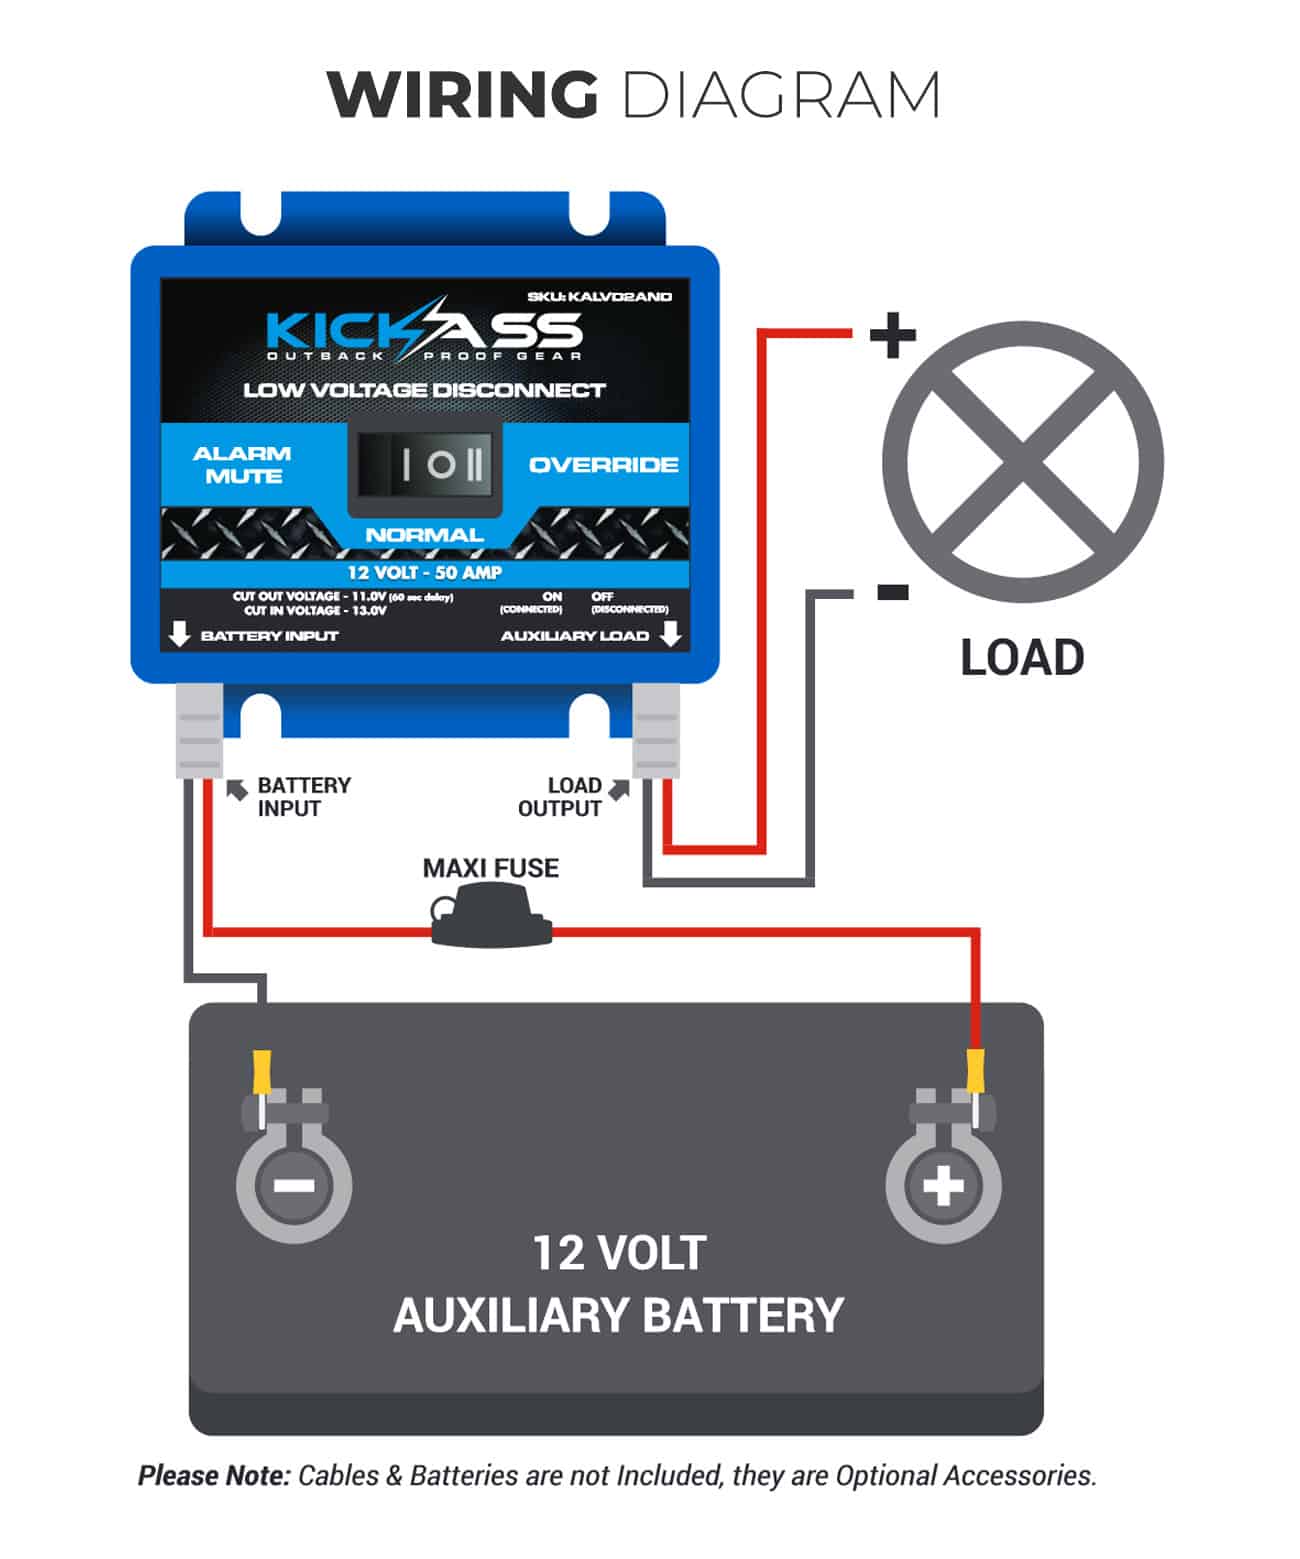 KALVDMAXI - KICKASS Low Voltage Disconnect LVD with Inline Fuse